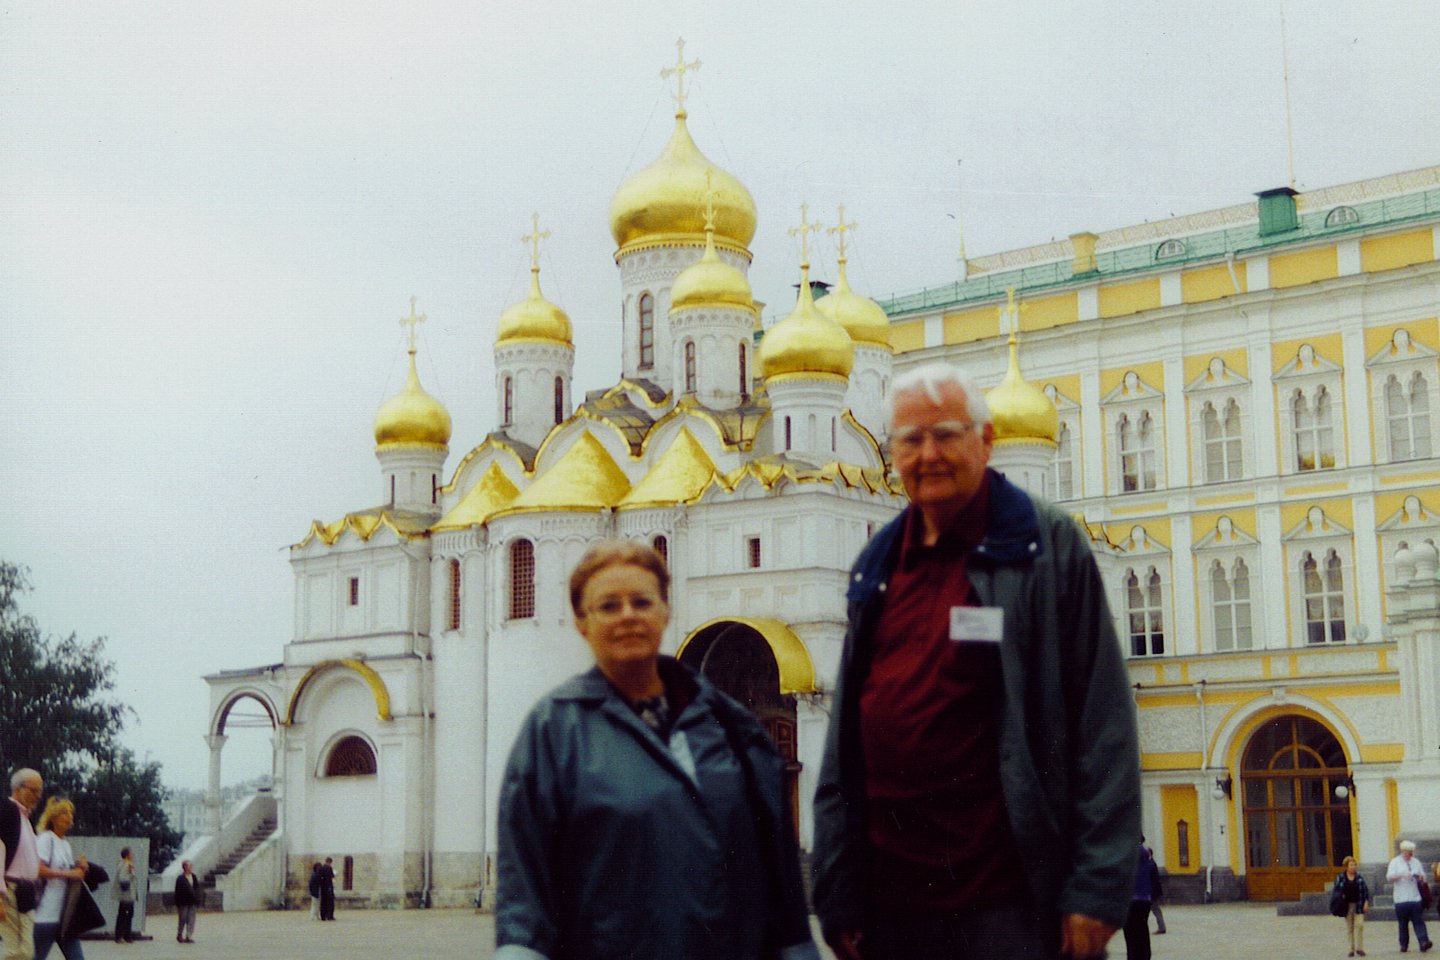 A photo of Anelle and Ted in front of a large white palace with golden domes.